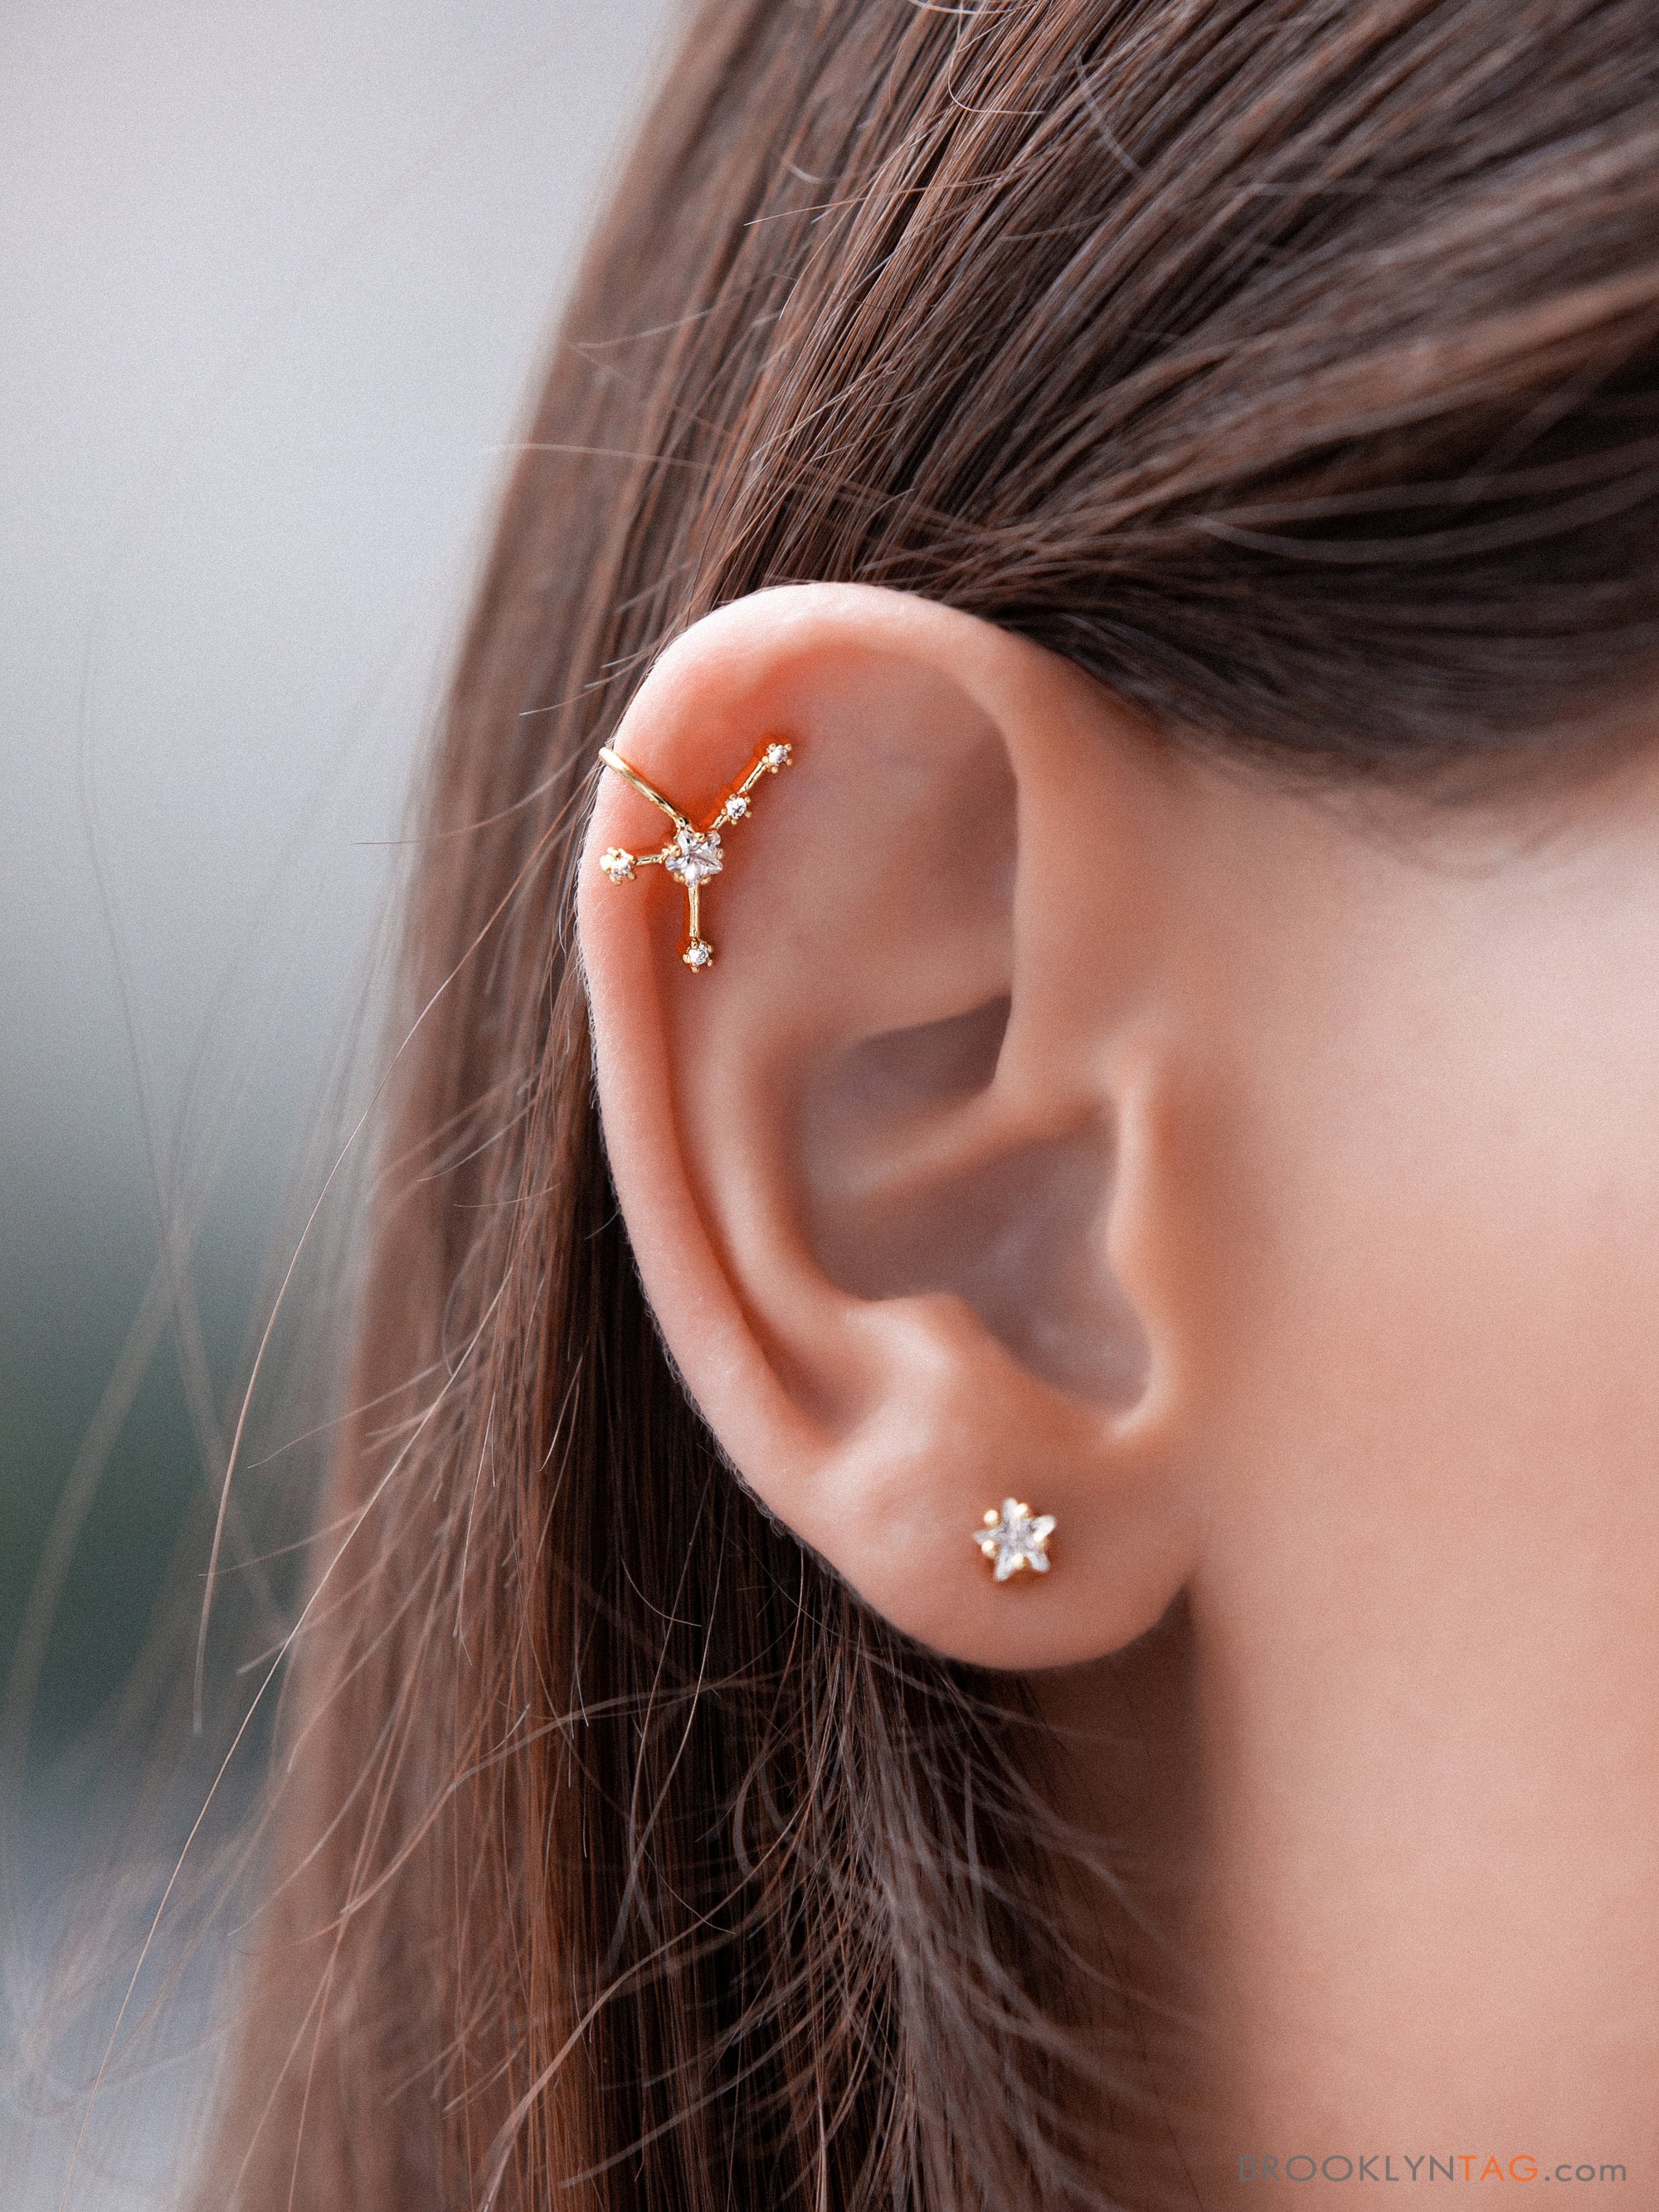 Cancer Constellation Jewelry, Ear Cuff Earring With Crystals